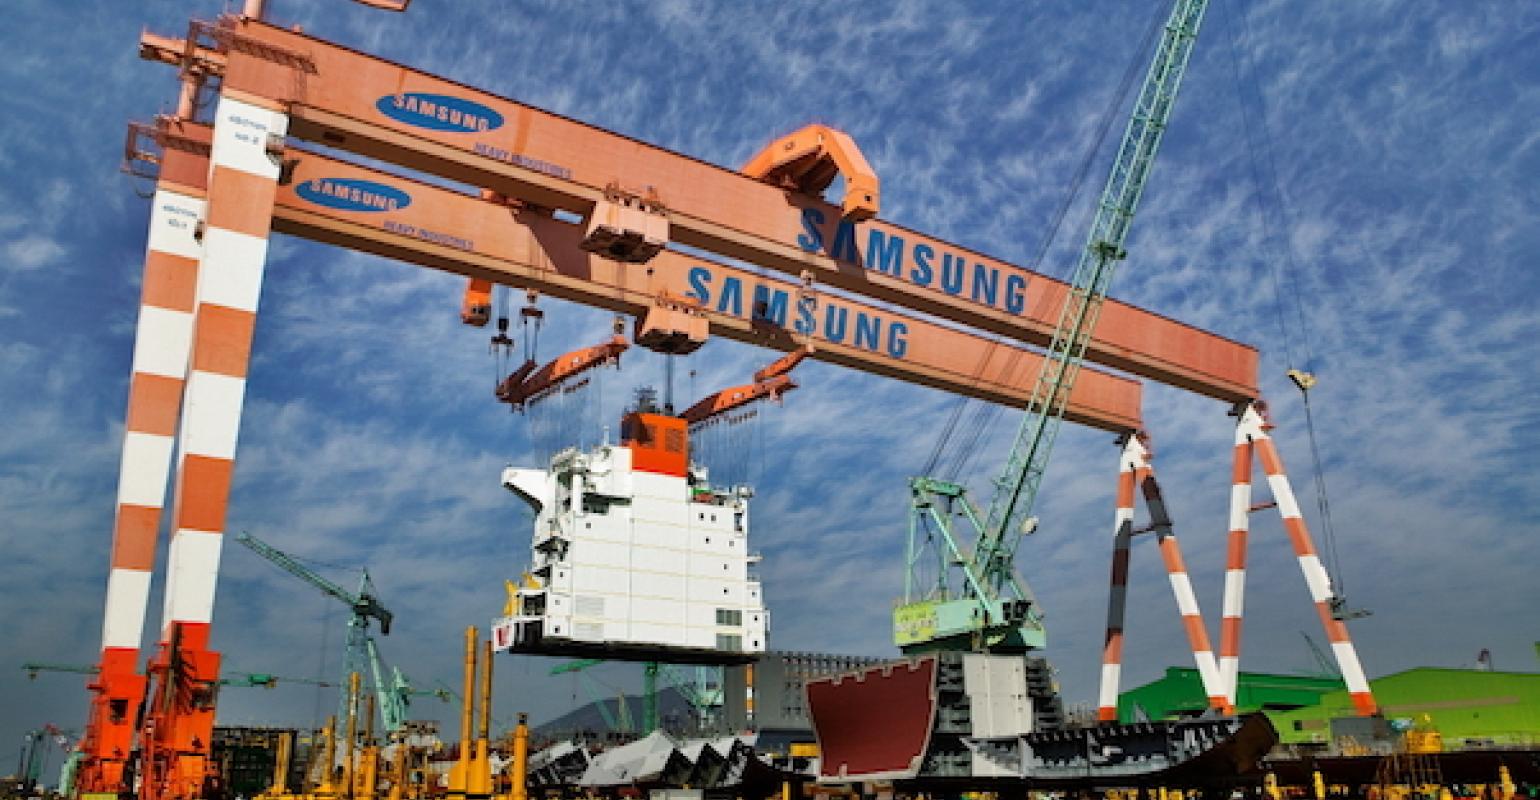 Samsung Heavy Industries wins order for four VLCCs